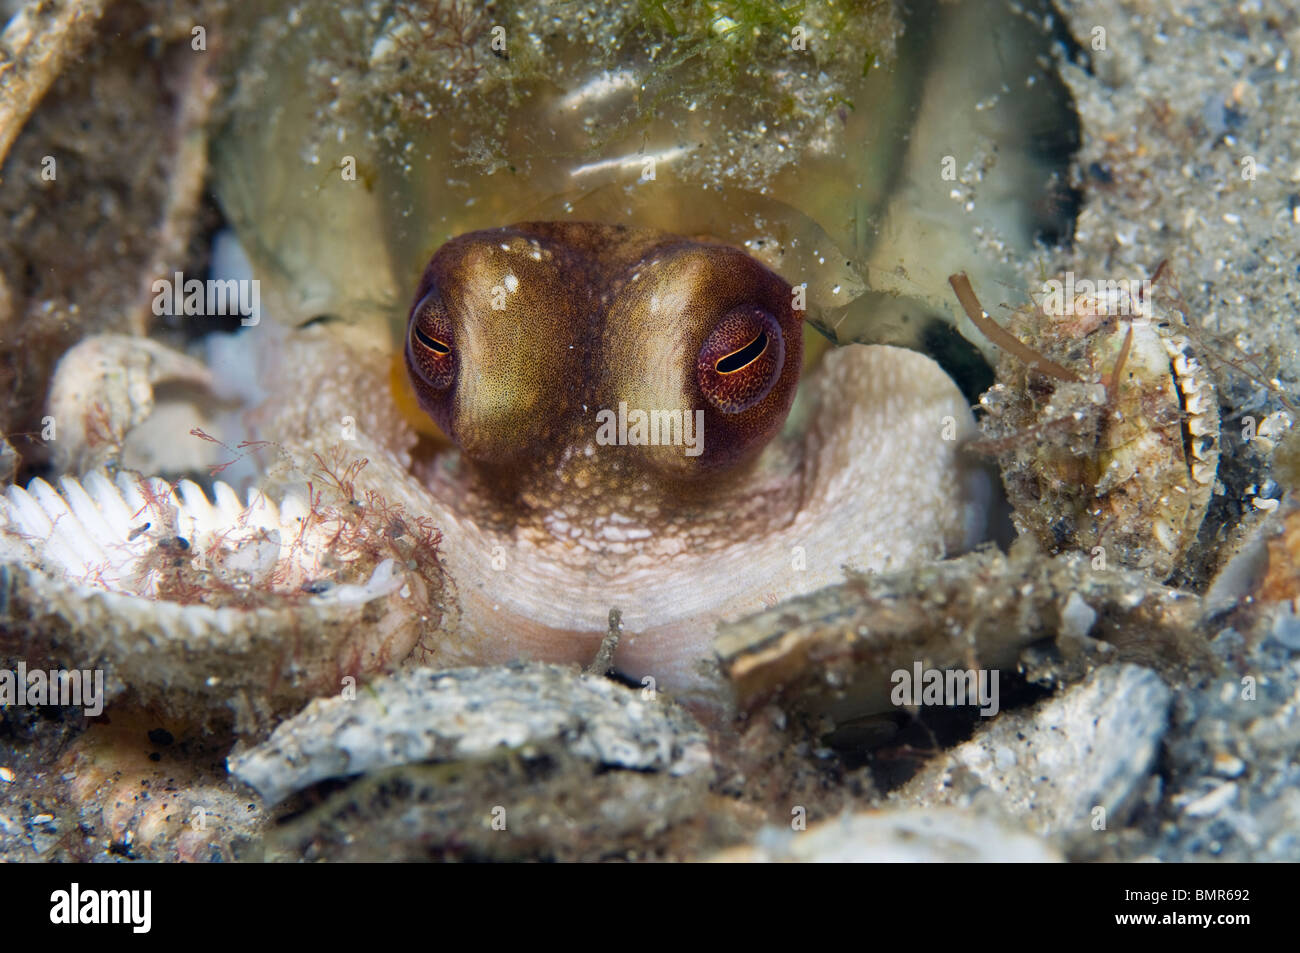 Reef Octopus (Octopus briareus) photographed in the Lake Worth Lagoon, Palm Beach, FL. Stock Photo